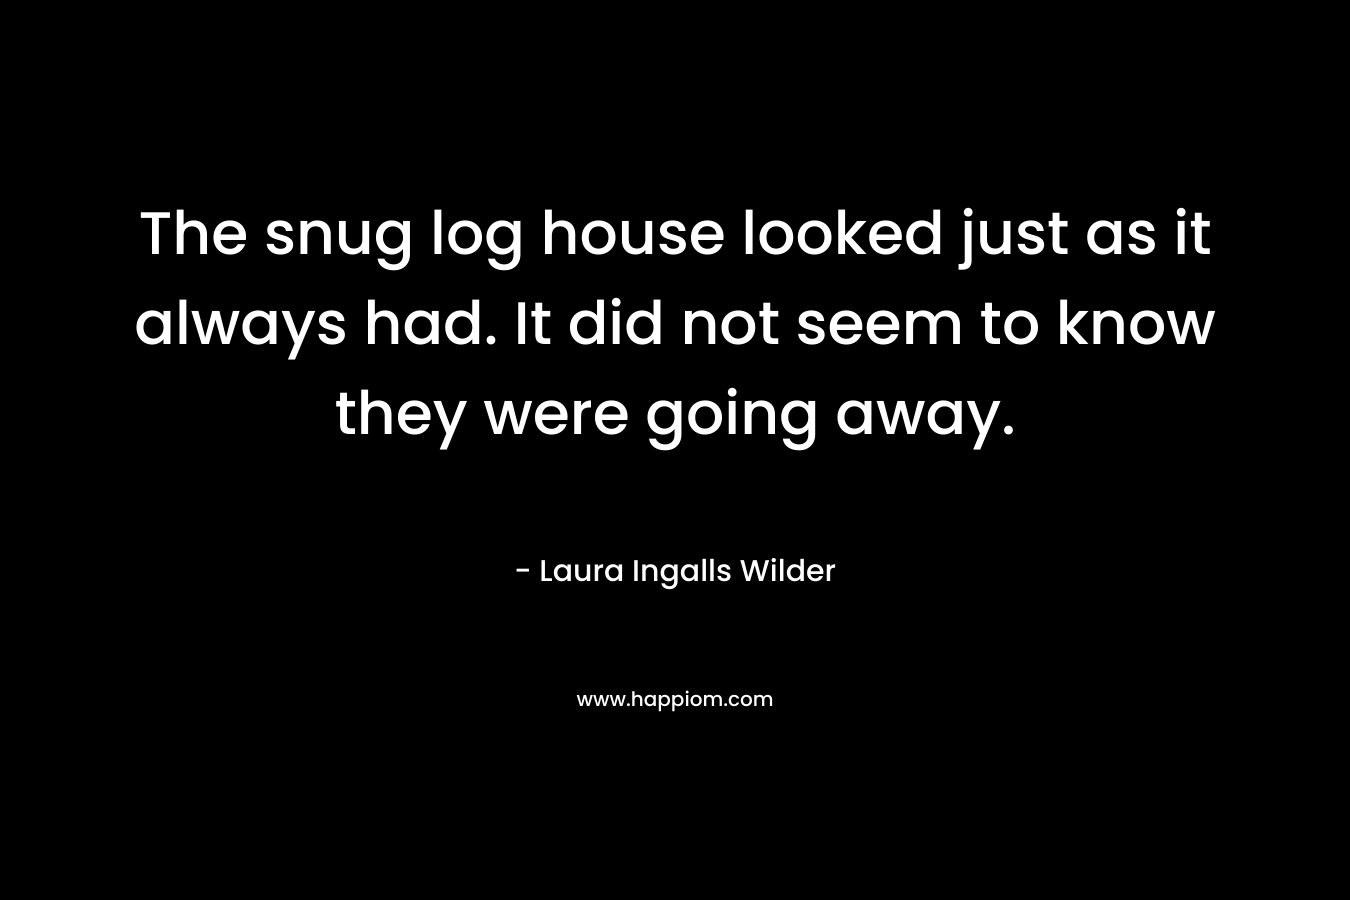 The snug log house looked just as it always had. It did not seem to know they were going away. – Laura Ingalls Wilder